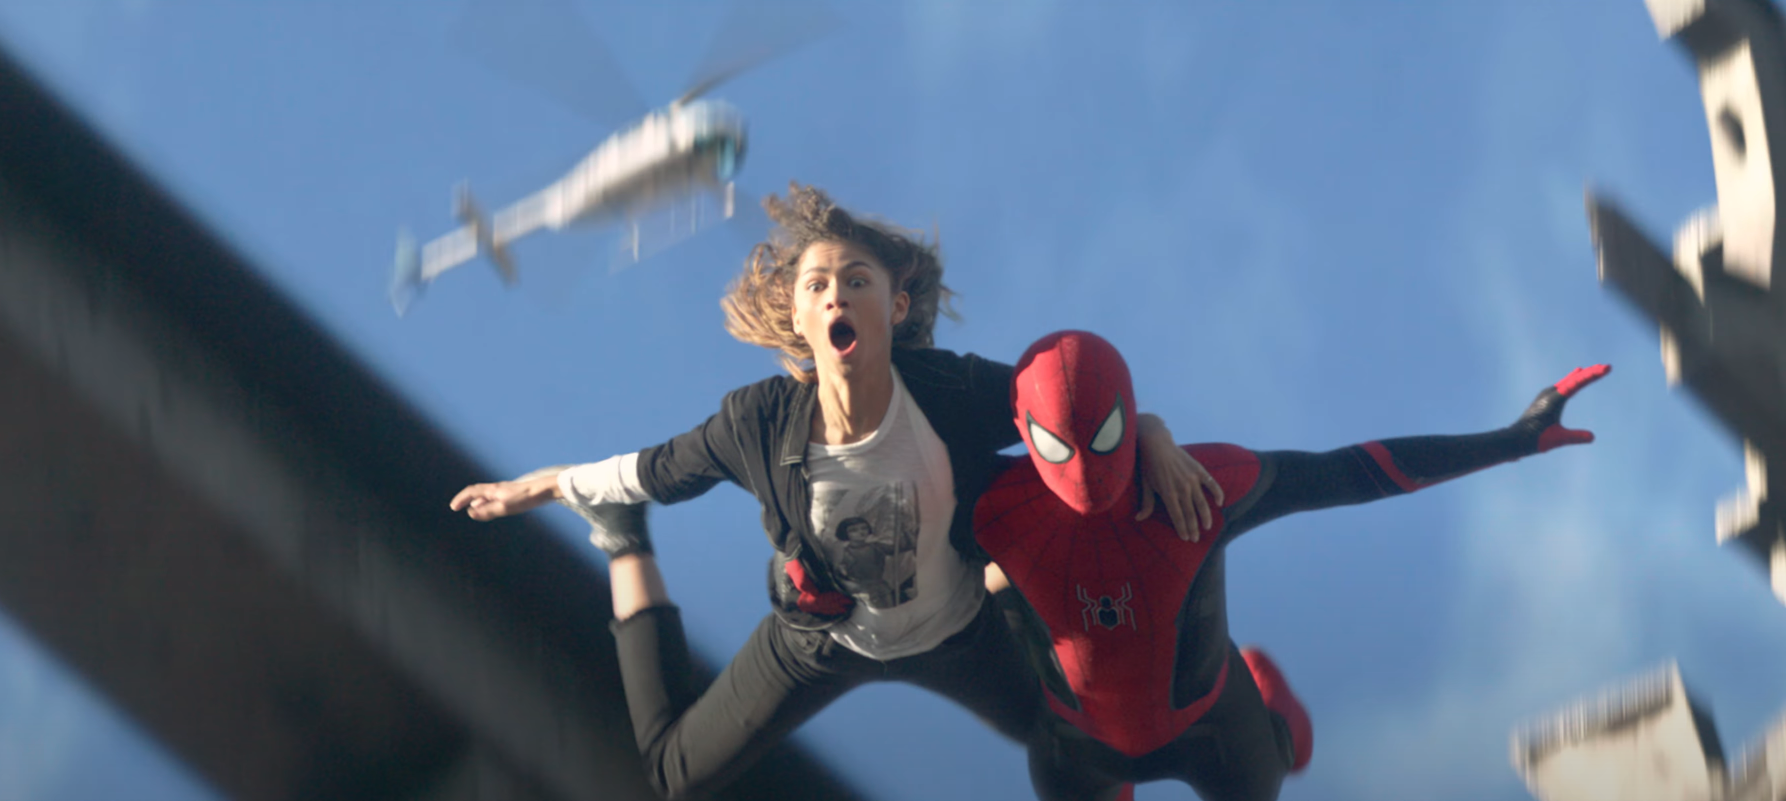 "Spider-Man 3: No Way Home" won the top prize at the Kids' Choice Awards